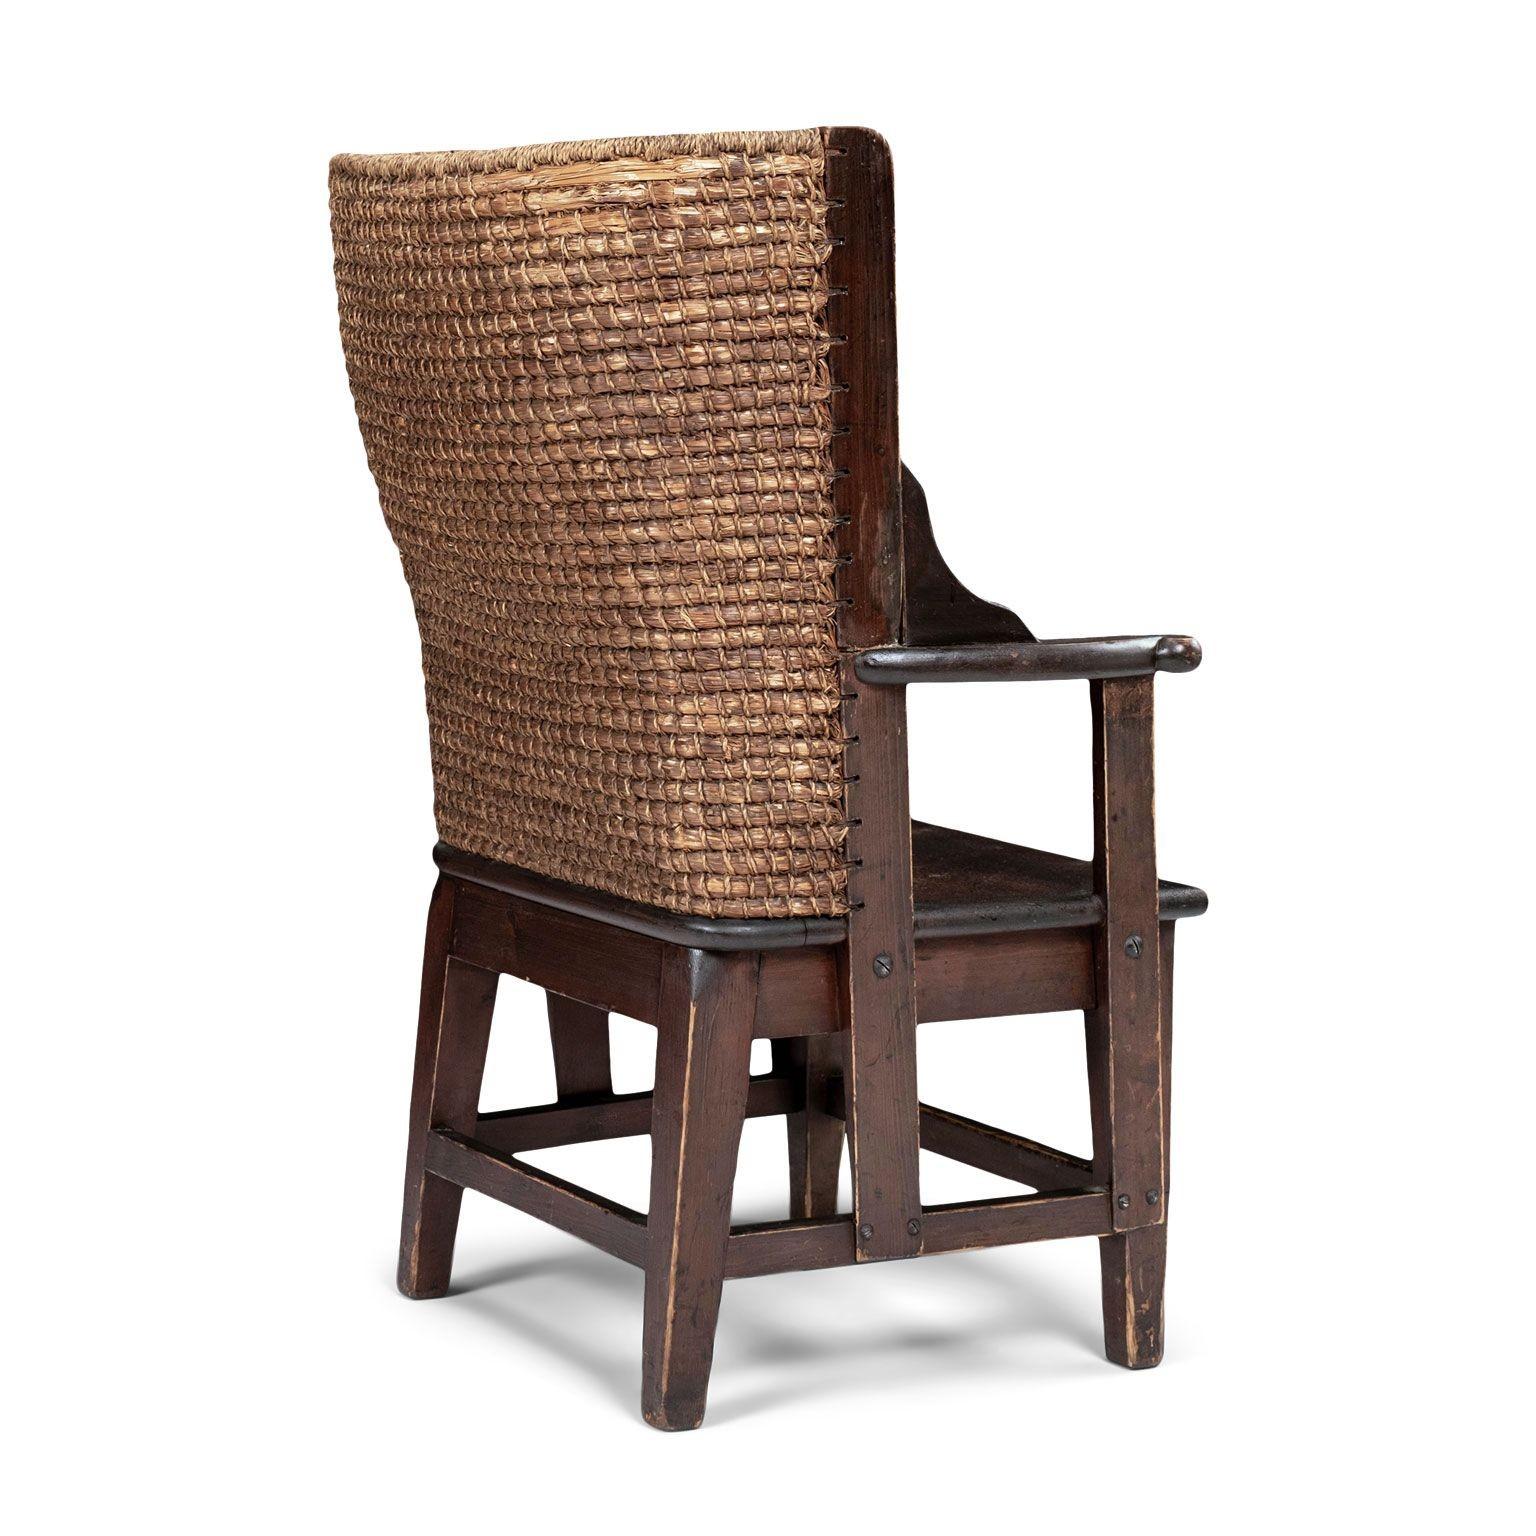 Hand-Carved Petite Jute and Pine Scottish Orkney Chair